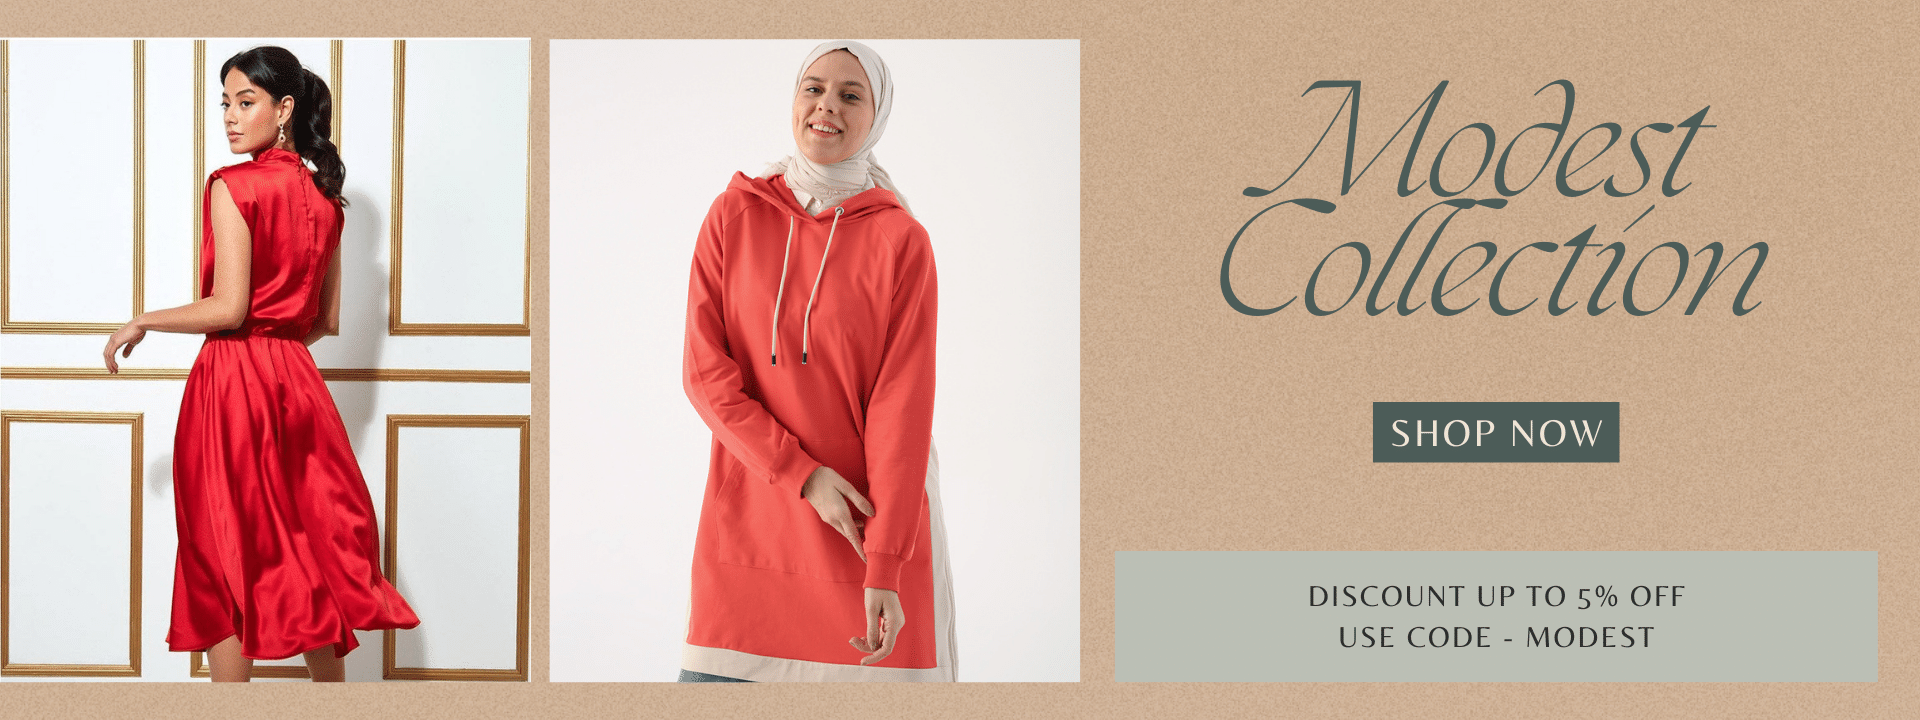 Modest Collection For Women